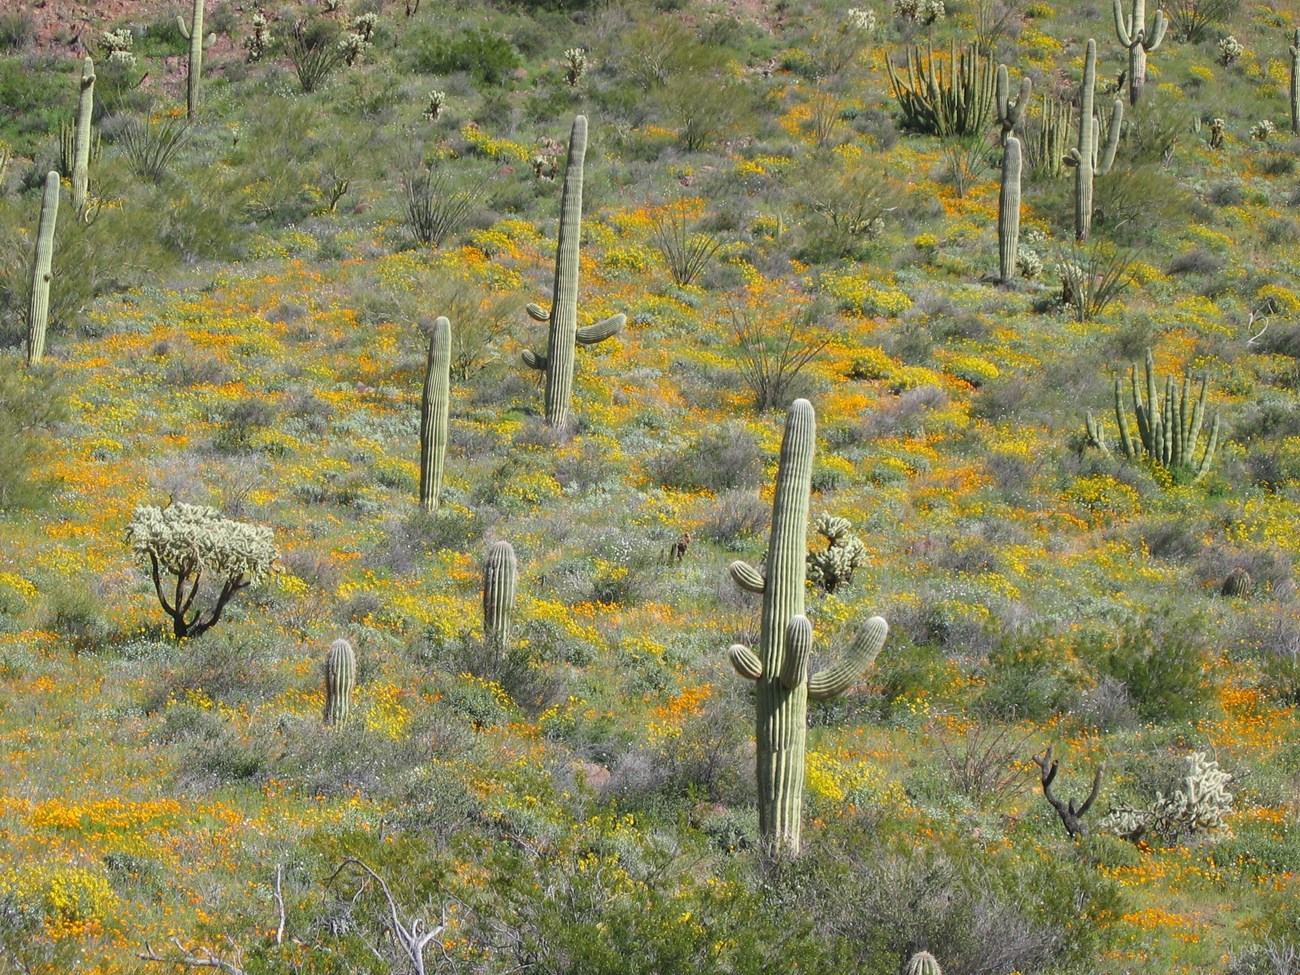 Beautiful orange and gold wildflowers surround desert cacti, creating a colorful carpet across the desert floor.